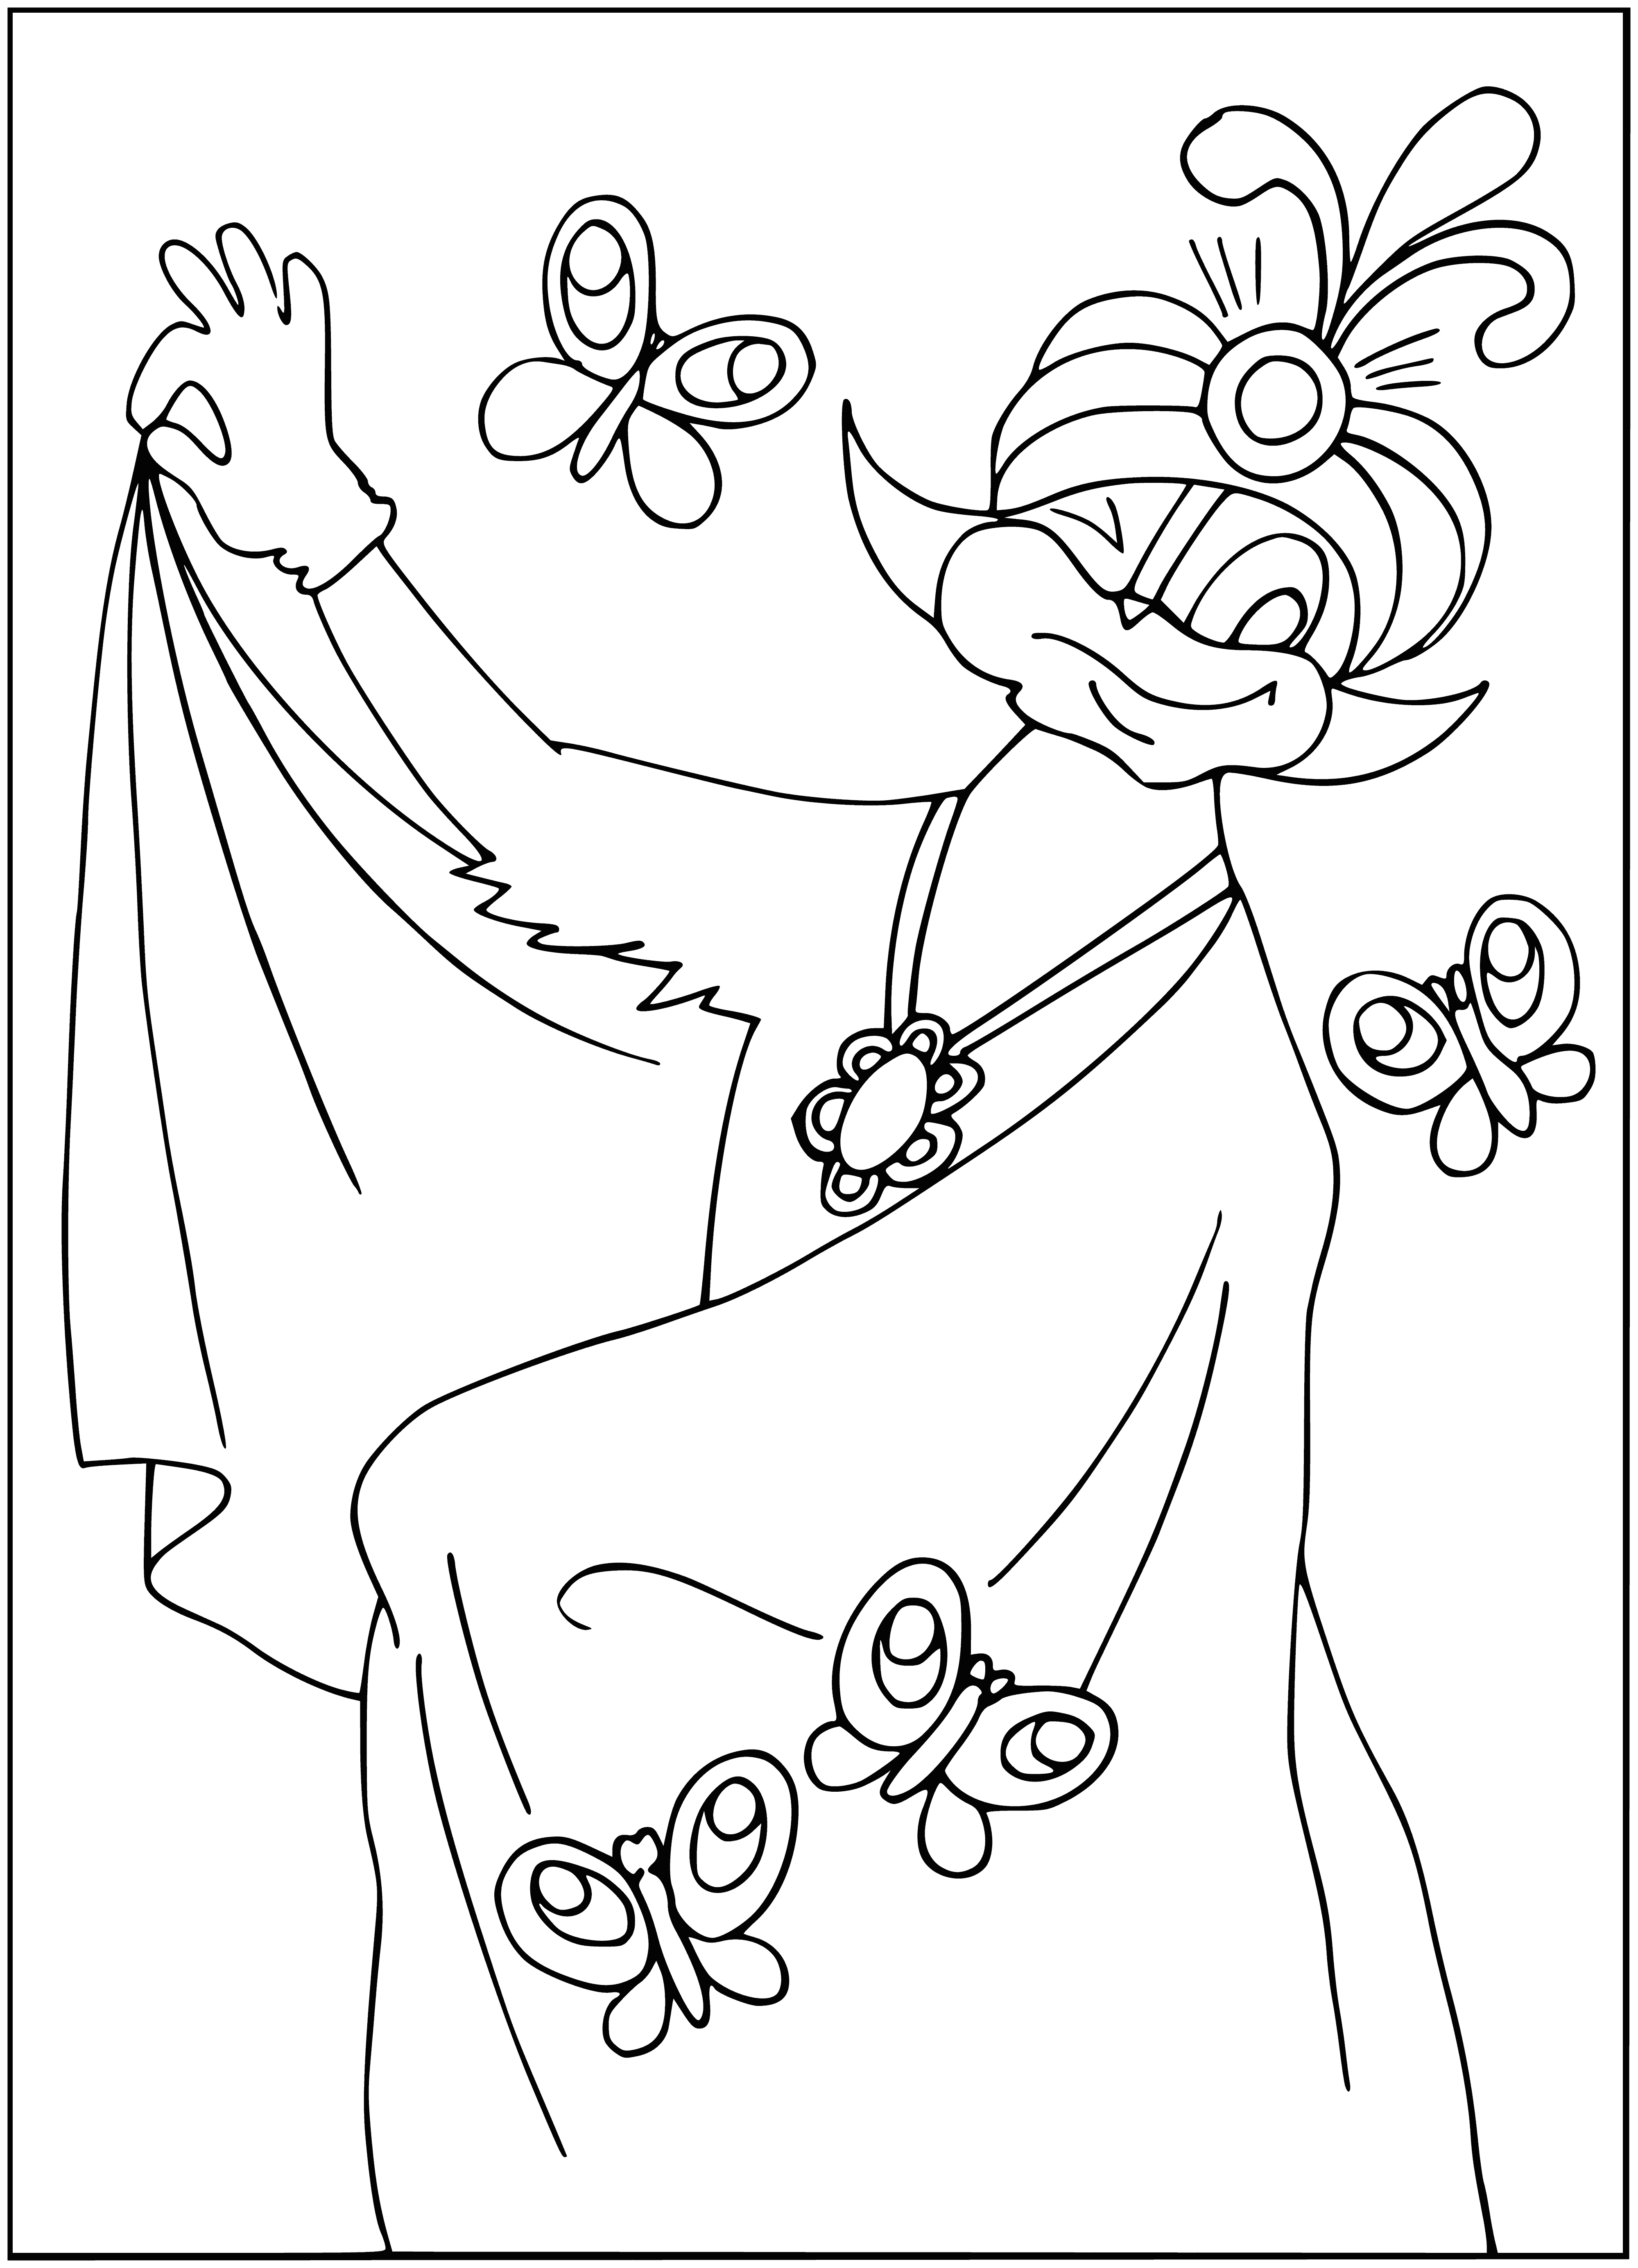 coloring page: A man in a purple robe stands with four animals - a donkey, dog, cat, & rooster - staff in right hand, white beard, pointy hat. Eyes closed, smiling.